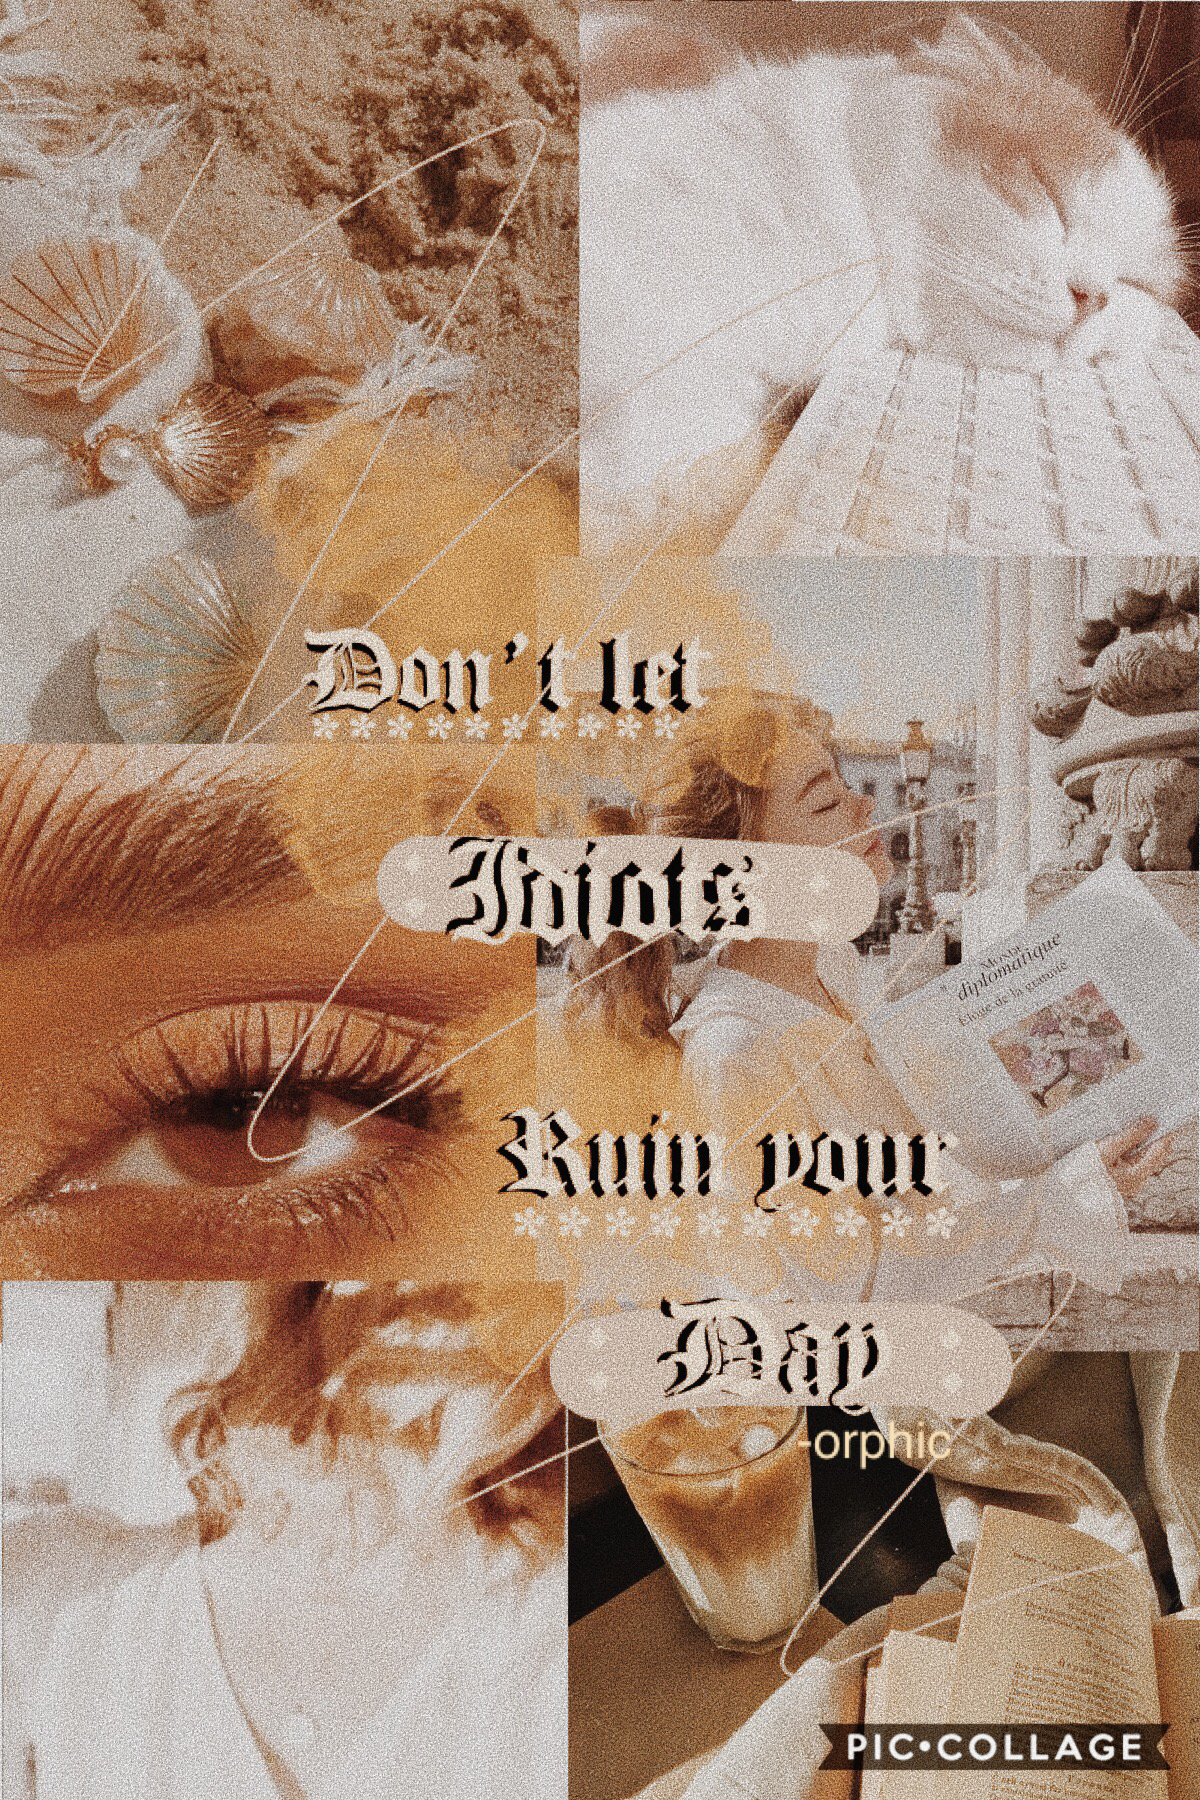 first collage. Idk..
As you can see I changed my user to -myshot- (Hamilton) that’s like my favorite song lol but idk if i like it. Can someone suggest Hamilton users? Thanks! Also feedback?